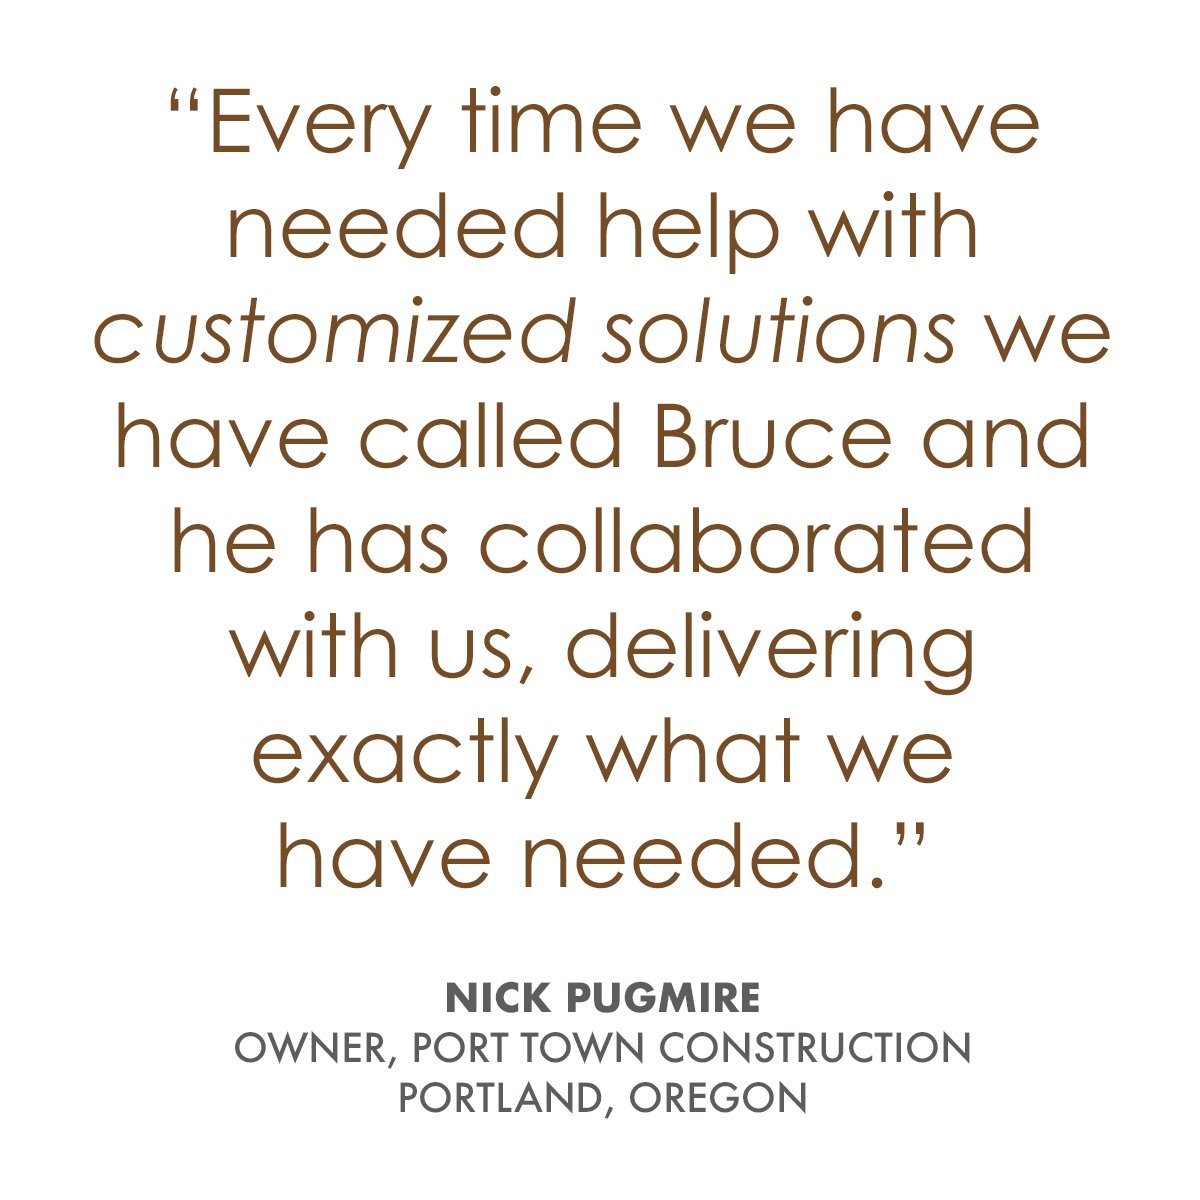   “Working with Bruce has been an absolutely great experience. As a residential and commercial general contractor we have many varied projects that require many creative solutions for cabinetry and much more. Every time we have needed help with custo